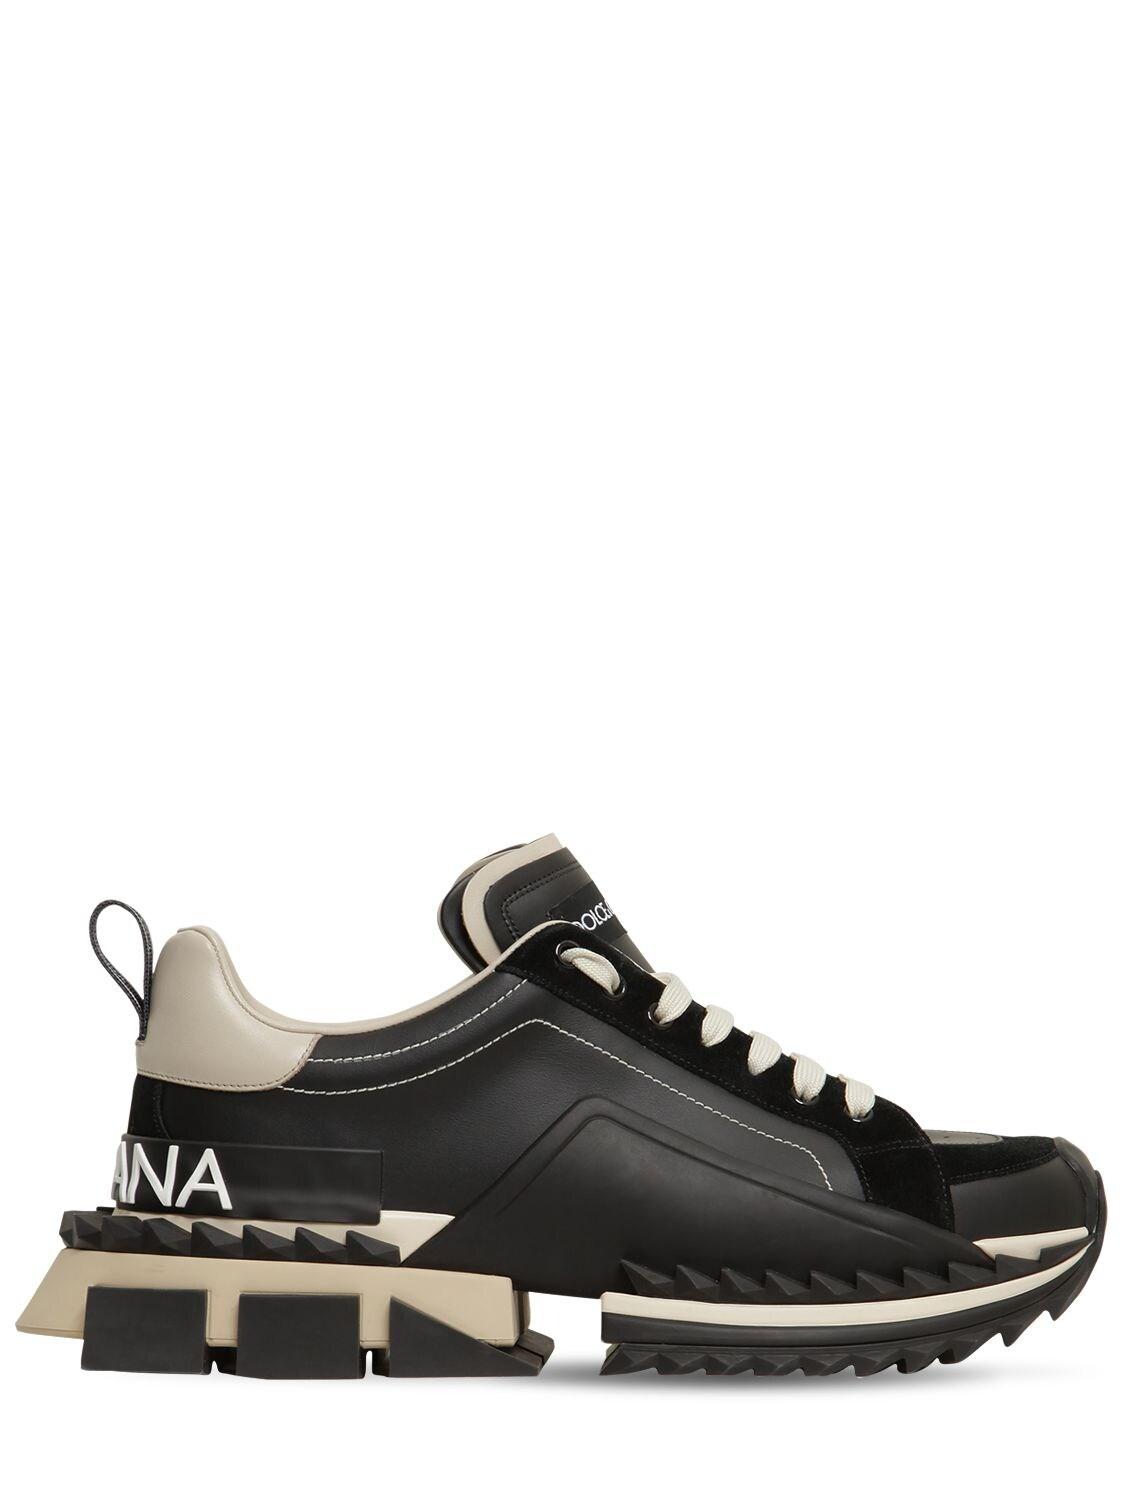 Dolce & Gabbana Super King Leather Sneakers in Black for Men - Lyst